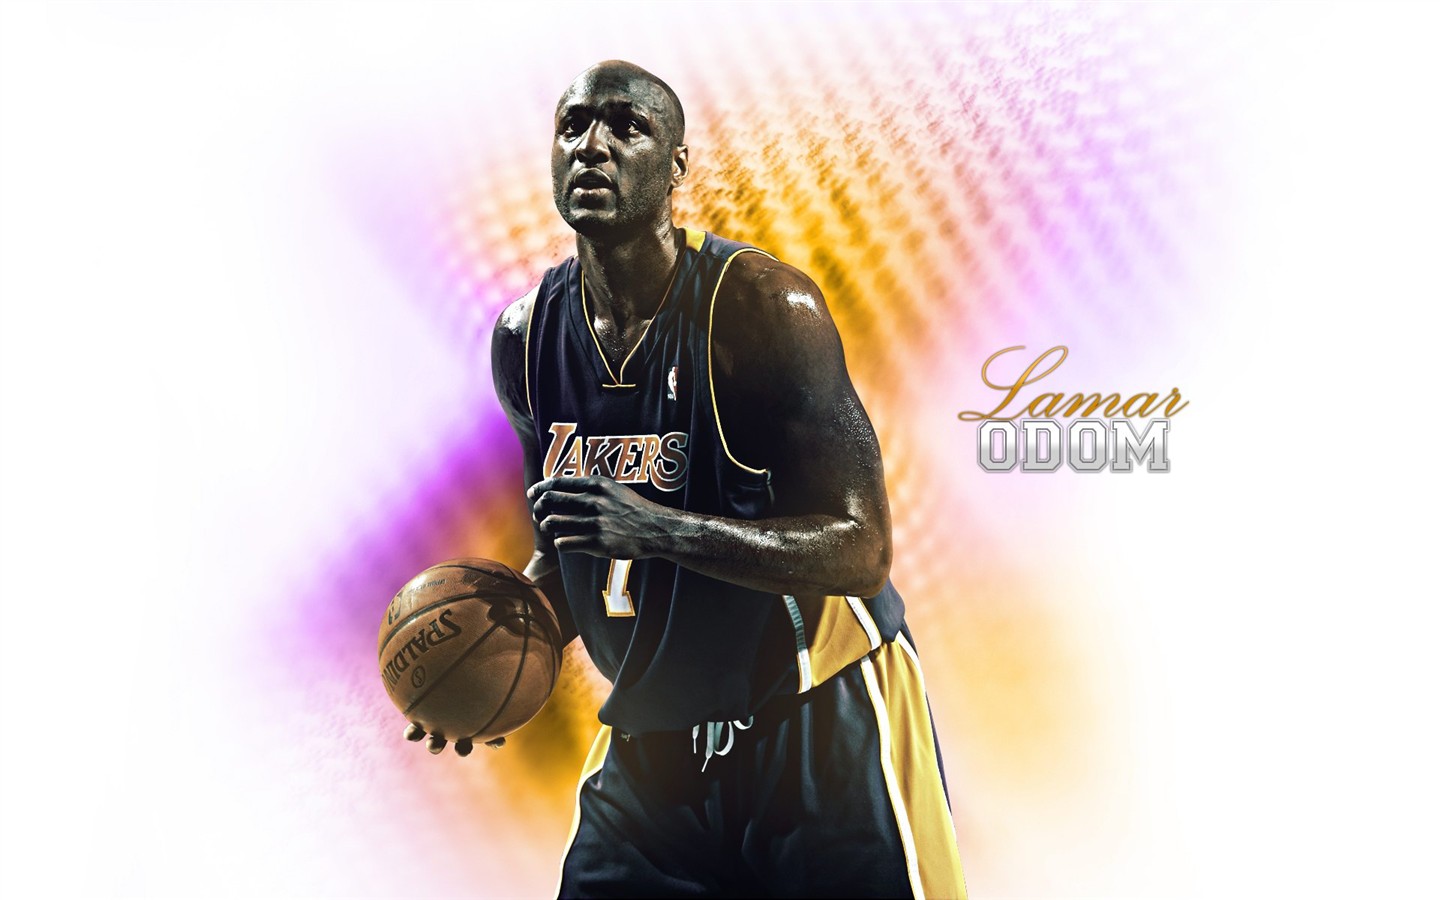 Los Angeles Lakers Wallpaper Oficial #17 - 1440x900